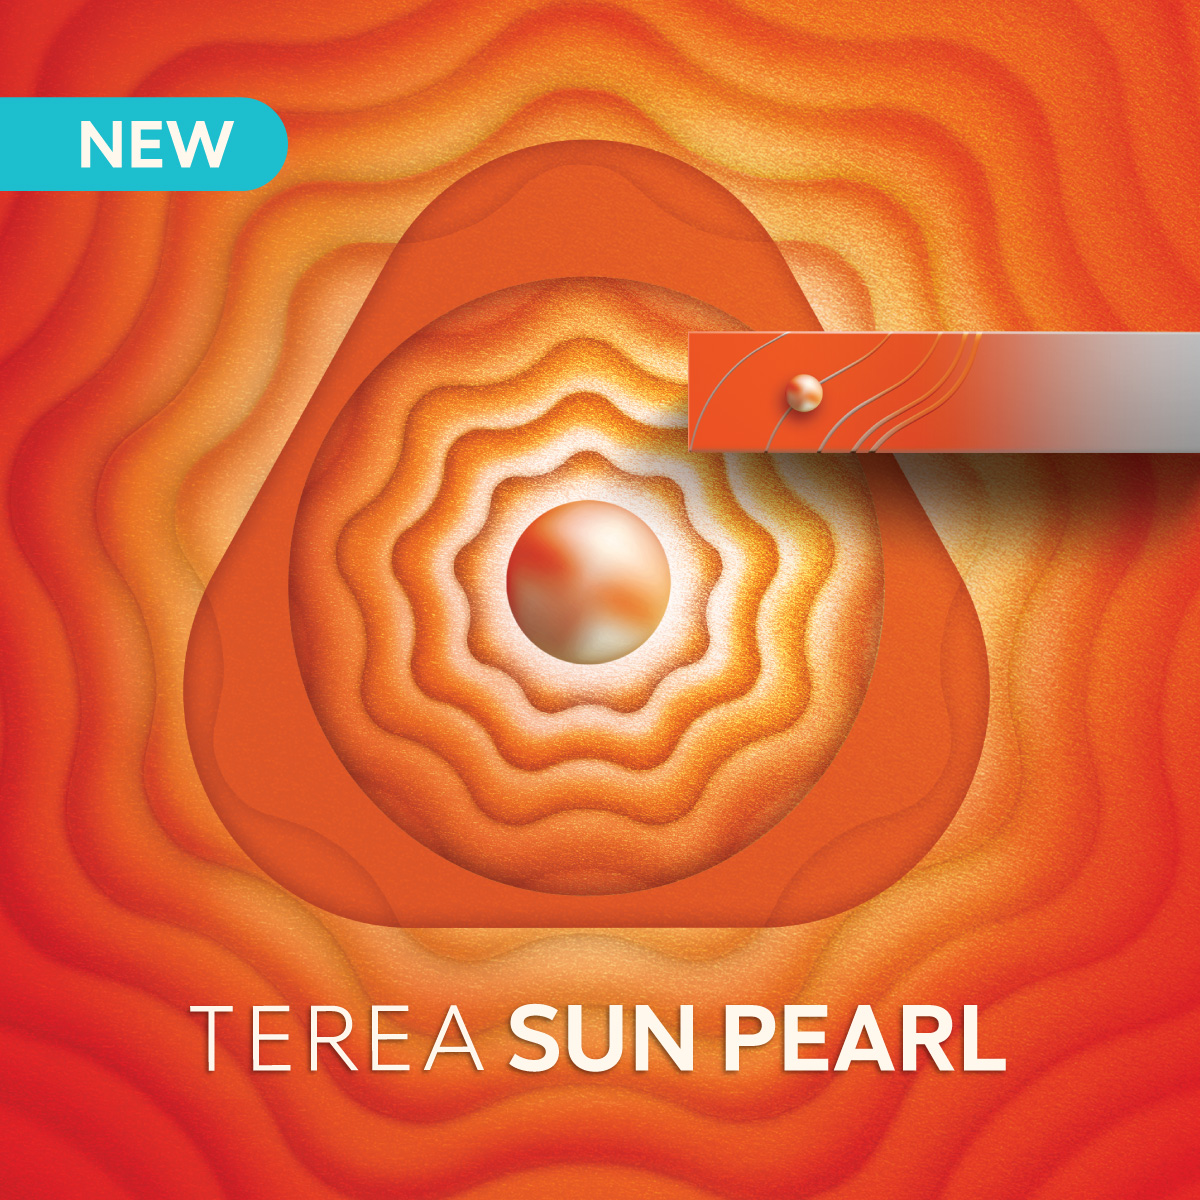 ready to boost your flavor with Terea Sun Pearl